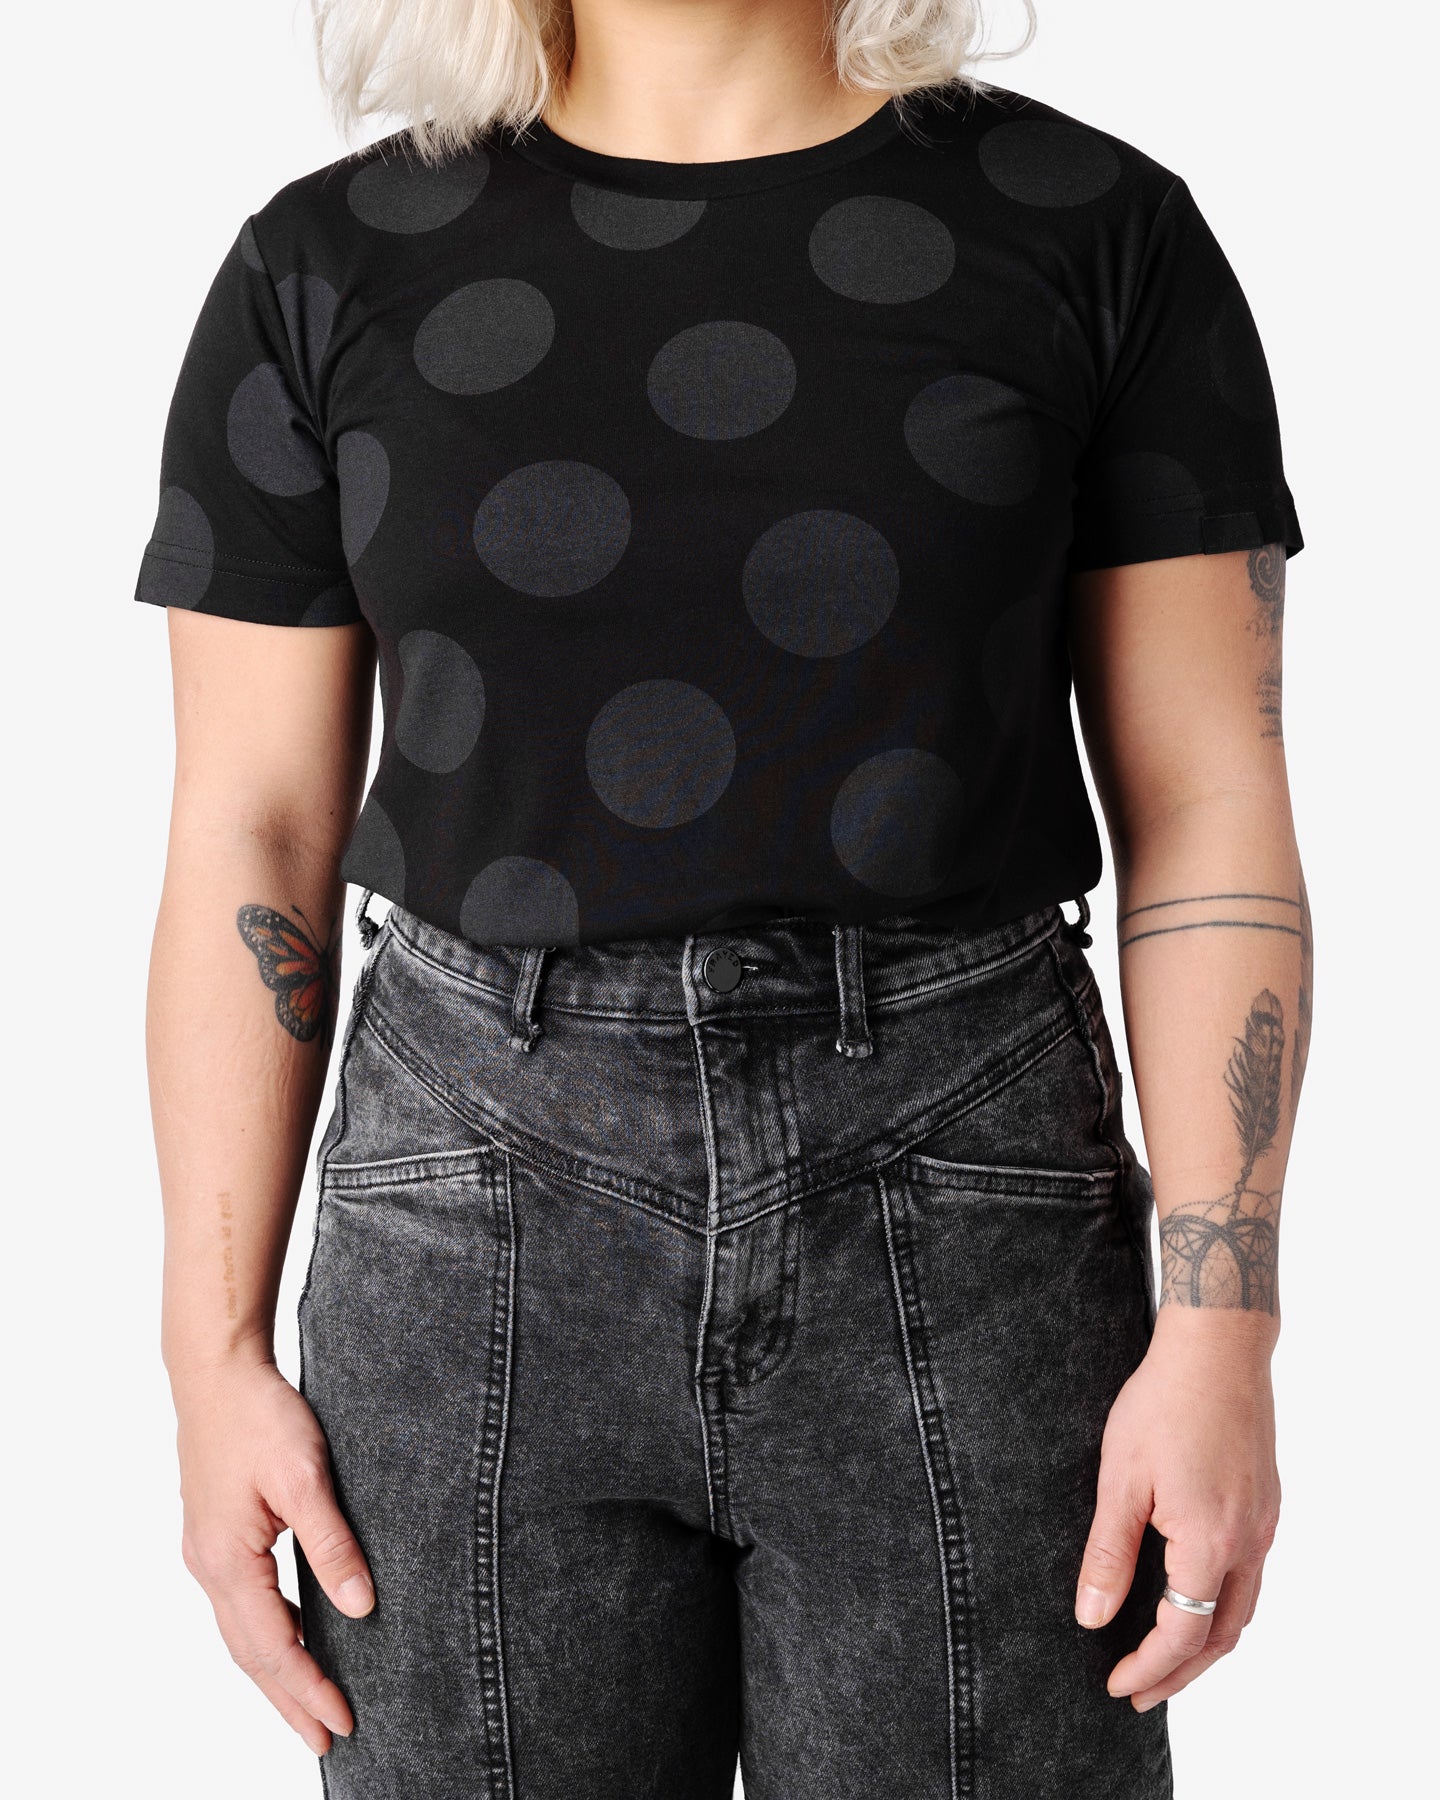 Black Polka Dot Short Sleeve Button-Up Top | Womens | X-Large (Available in XS, S, M, L) | 100% Polyester | Lulus Exclusive | Short Sleeve Tops